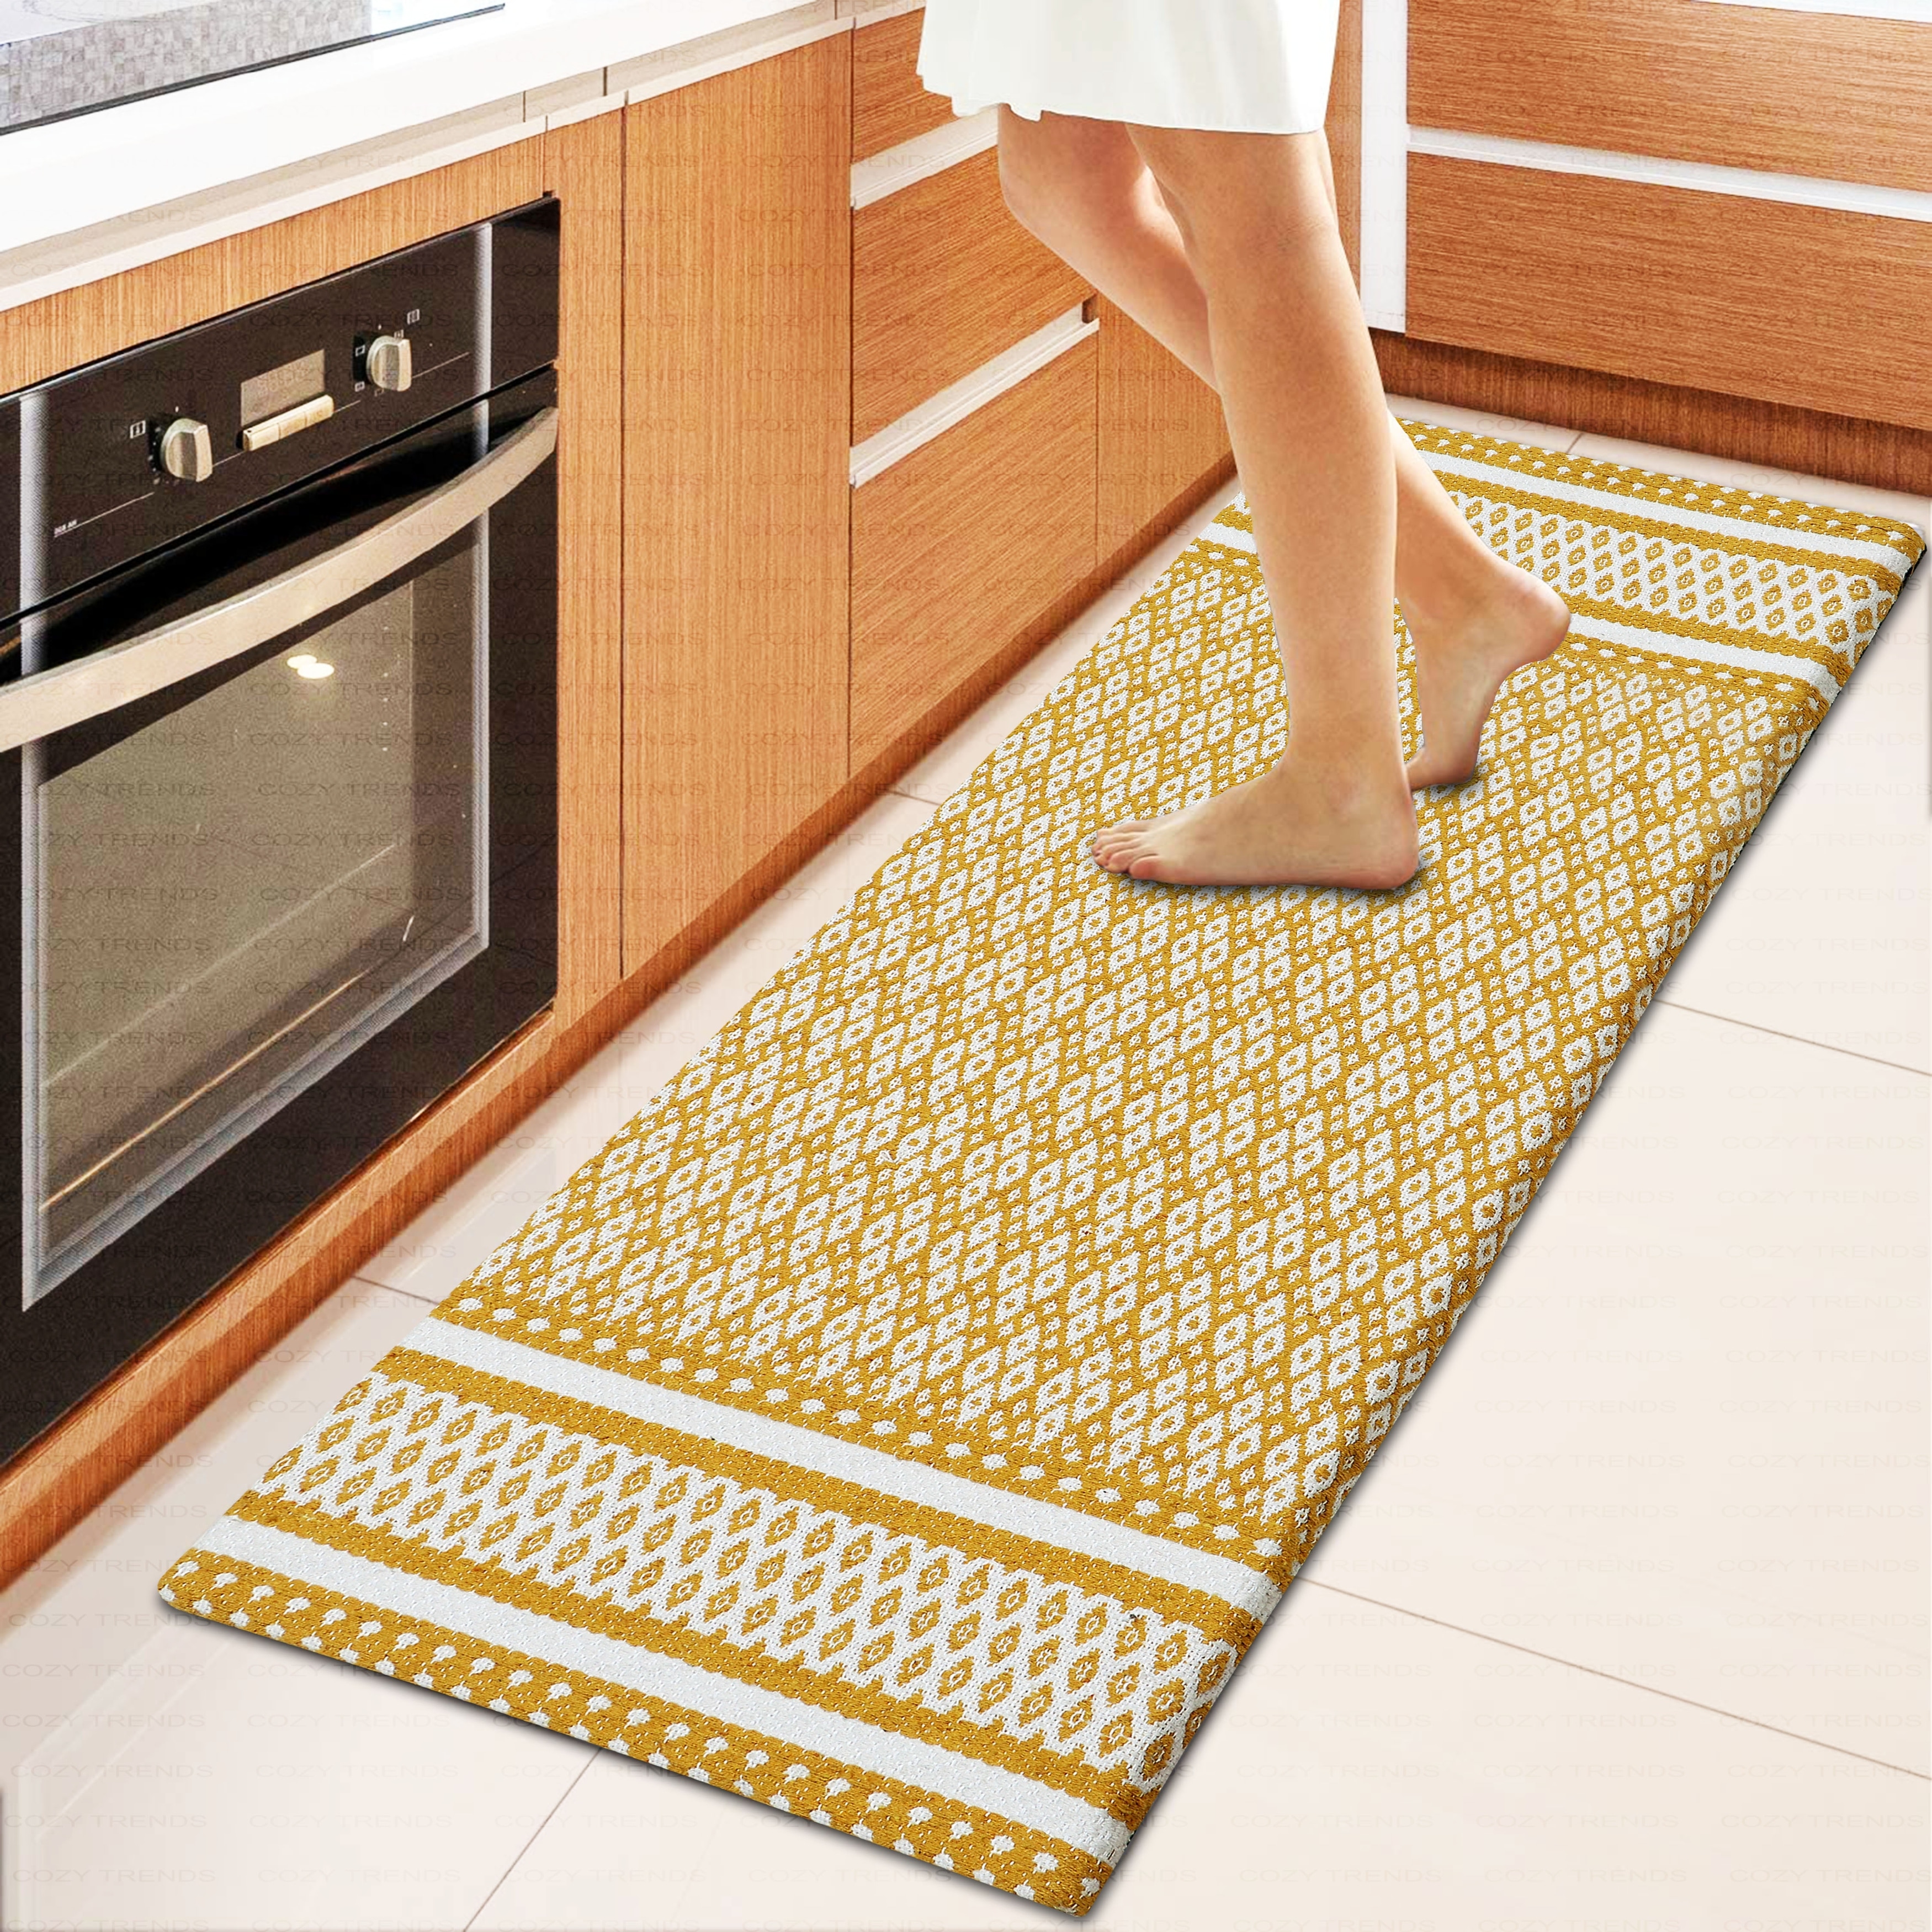 https://ak1.ostkcdn.com/images/products/is/images/direct/f5355a1016a31cbc97b806cb162928dd96cebb7a/Kitchen-Runner-Rug--Mat-Cushioned-Cotton-Hand-Woven-Anti-Fatigue-Mat-Kitchen-Bathroom-Bed-side-18x48%27%27.jpg